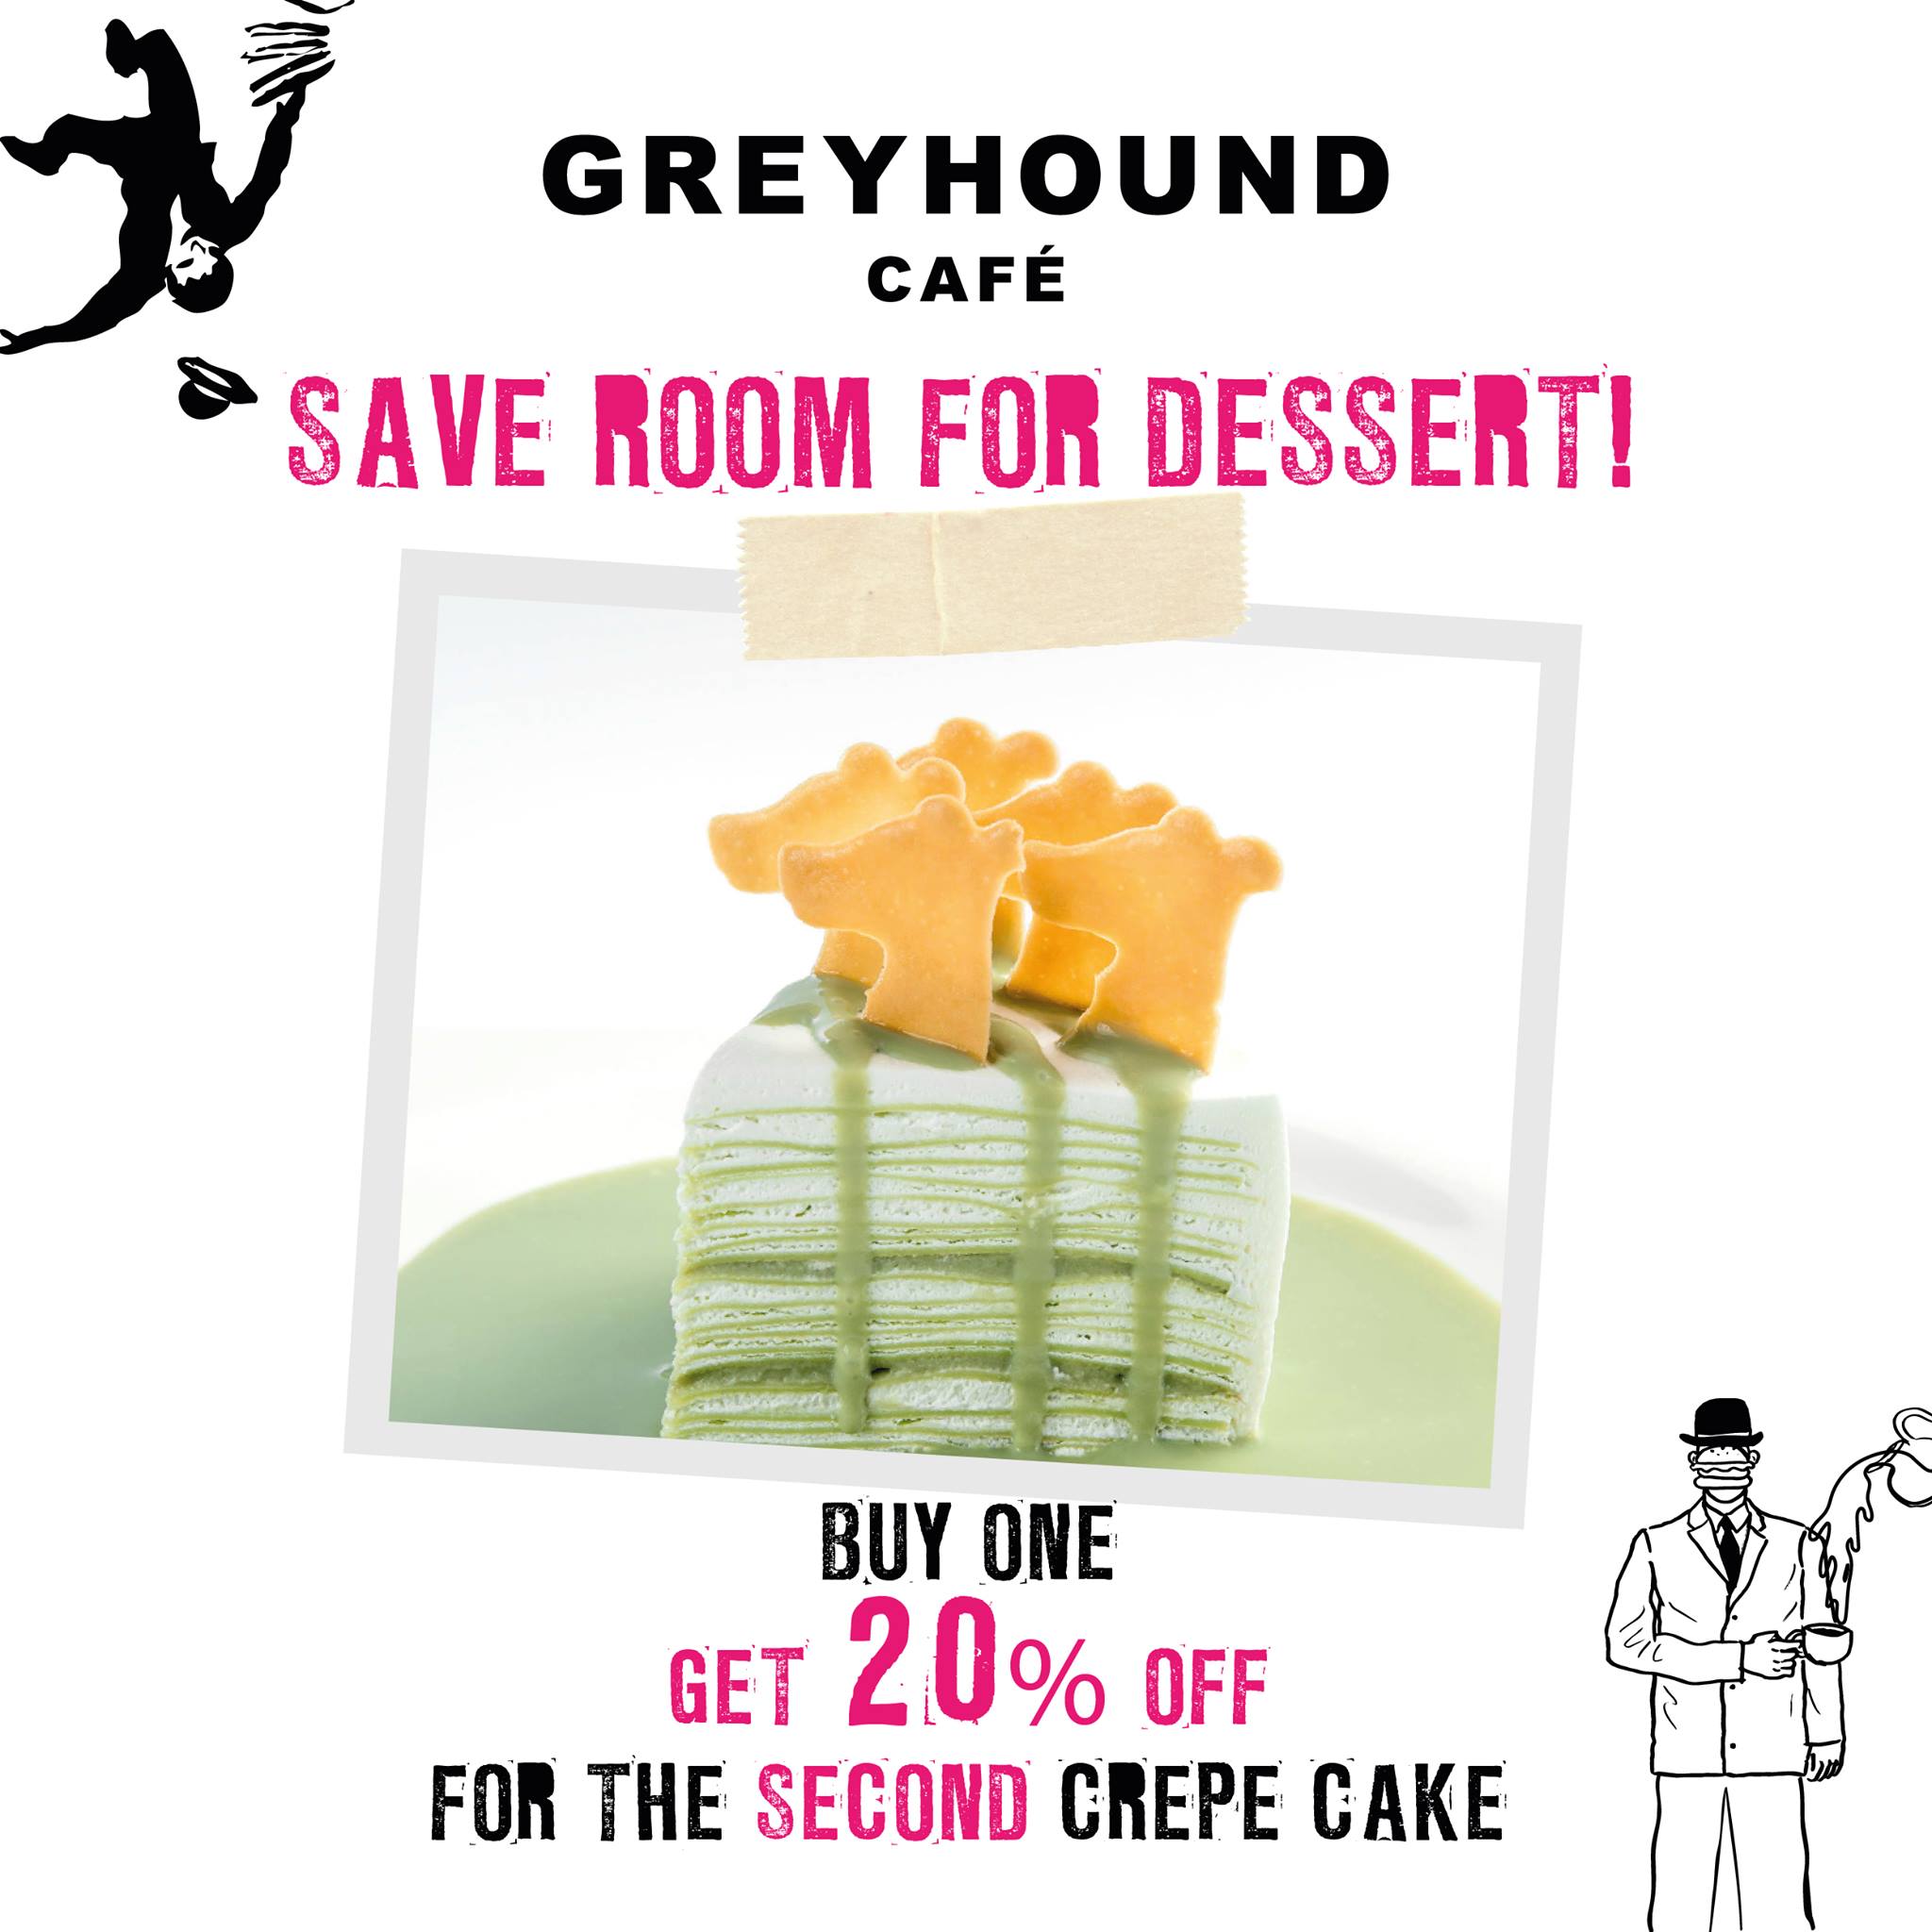 After a feast of spicy and flavourful dishes, there is always room for desserts! 🍰  From now till 30th April, 2020, you can enjoy a sweet 20% off on the second crepe cake order at MOKO, Whampoa, Elements, Cityplaza, New Town Plaza and Popcorn Greyhound Café!  Make it two to share this sweetness with your friends or lovers! ... #GreyhoundCafeHK #GreyhoundCafe #Thaifood #泰菜 ———————————————————